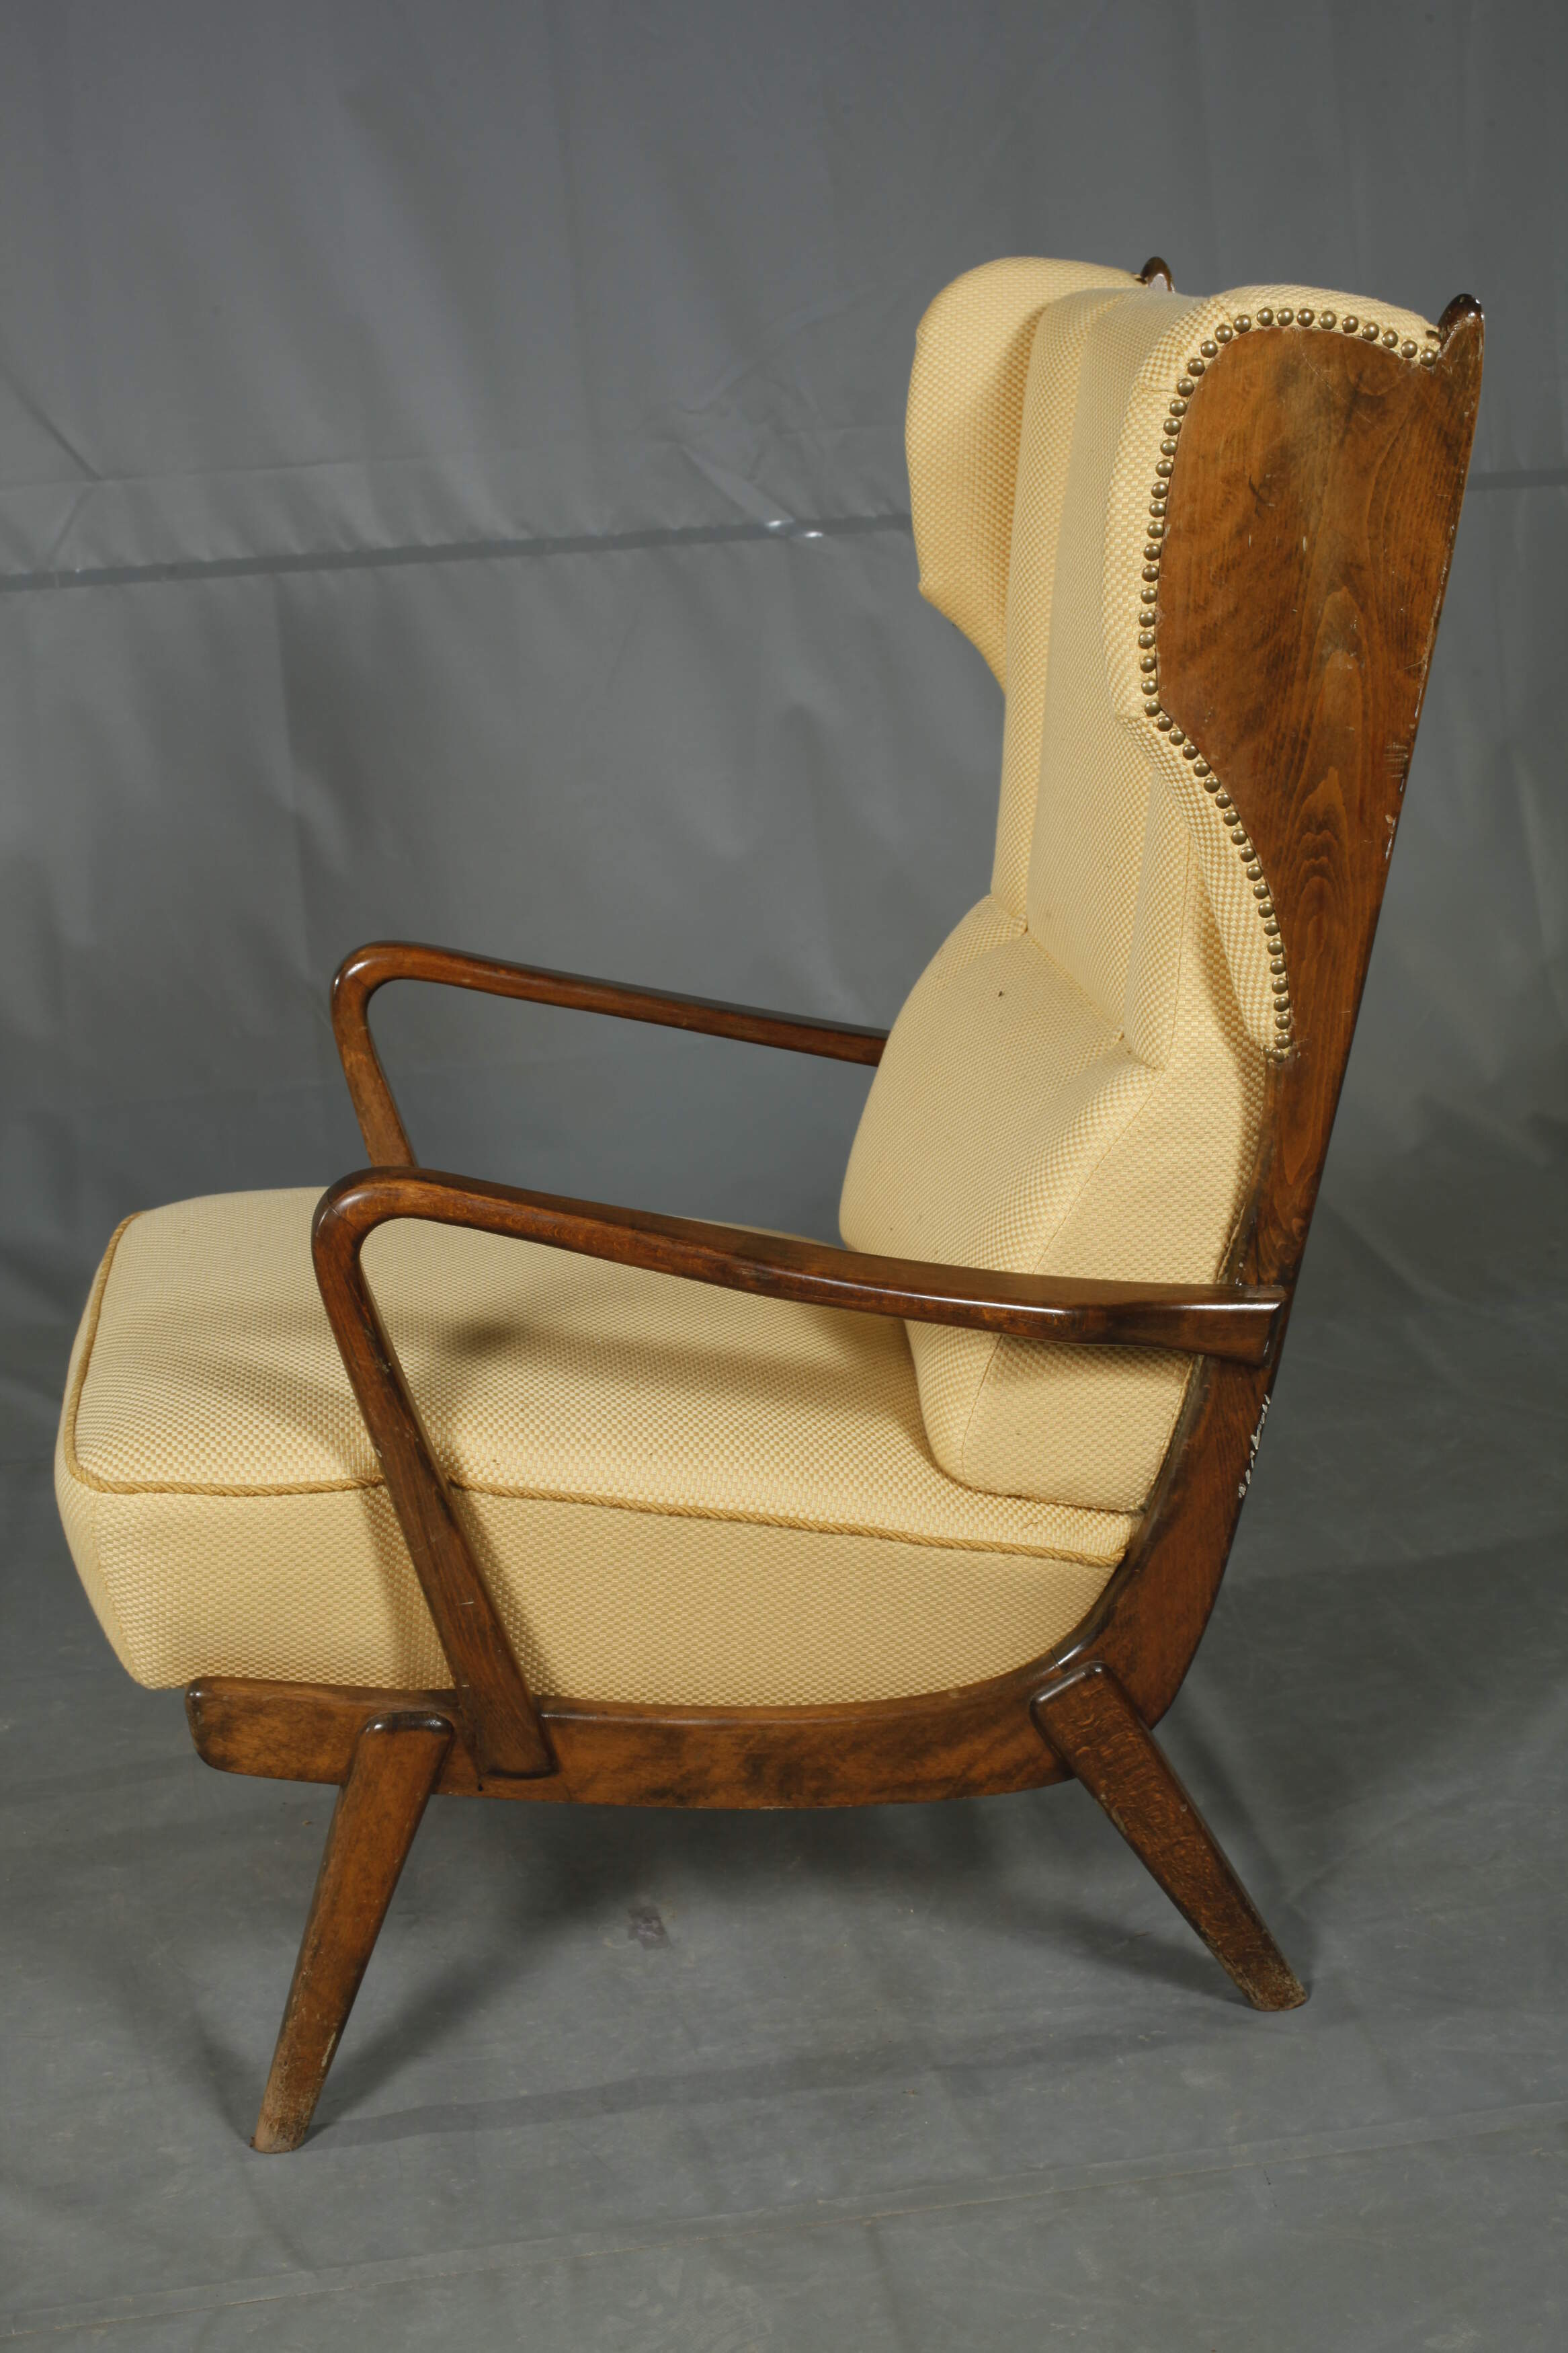 Eared back armchair with ottoman - Image 6 of 7